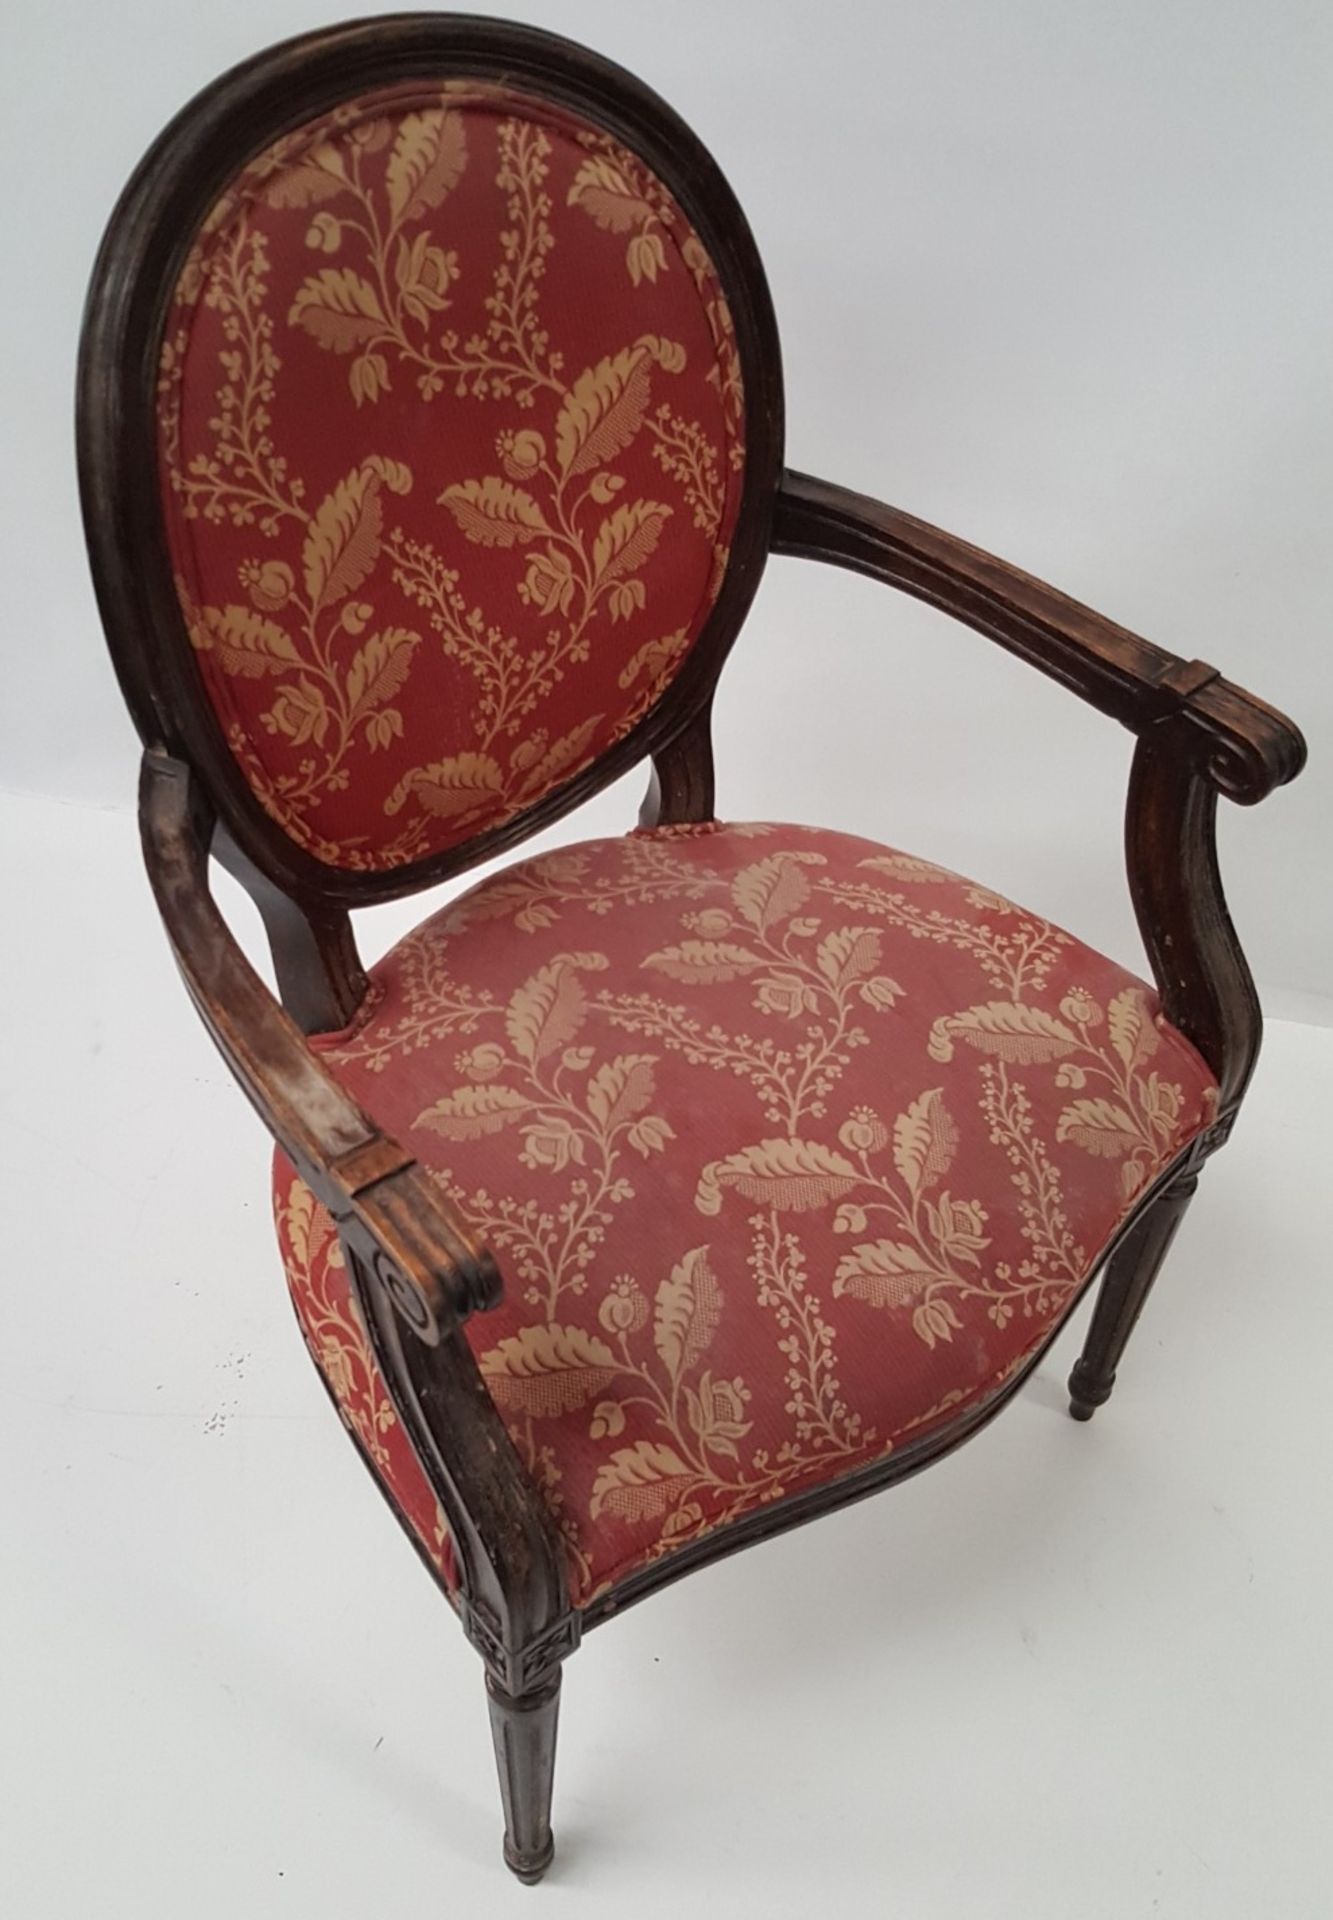 6 x Antique Style Wooden Chairs Upholstered In Red Fabric With Gold Leaf Design - CL431 - Image 7 of 8